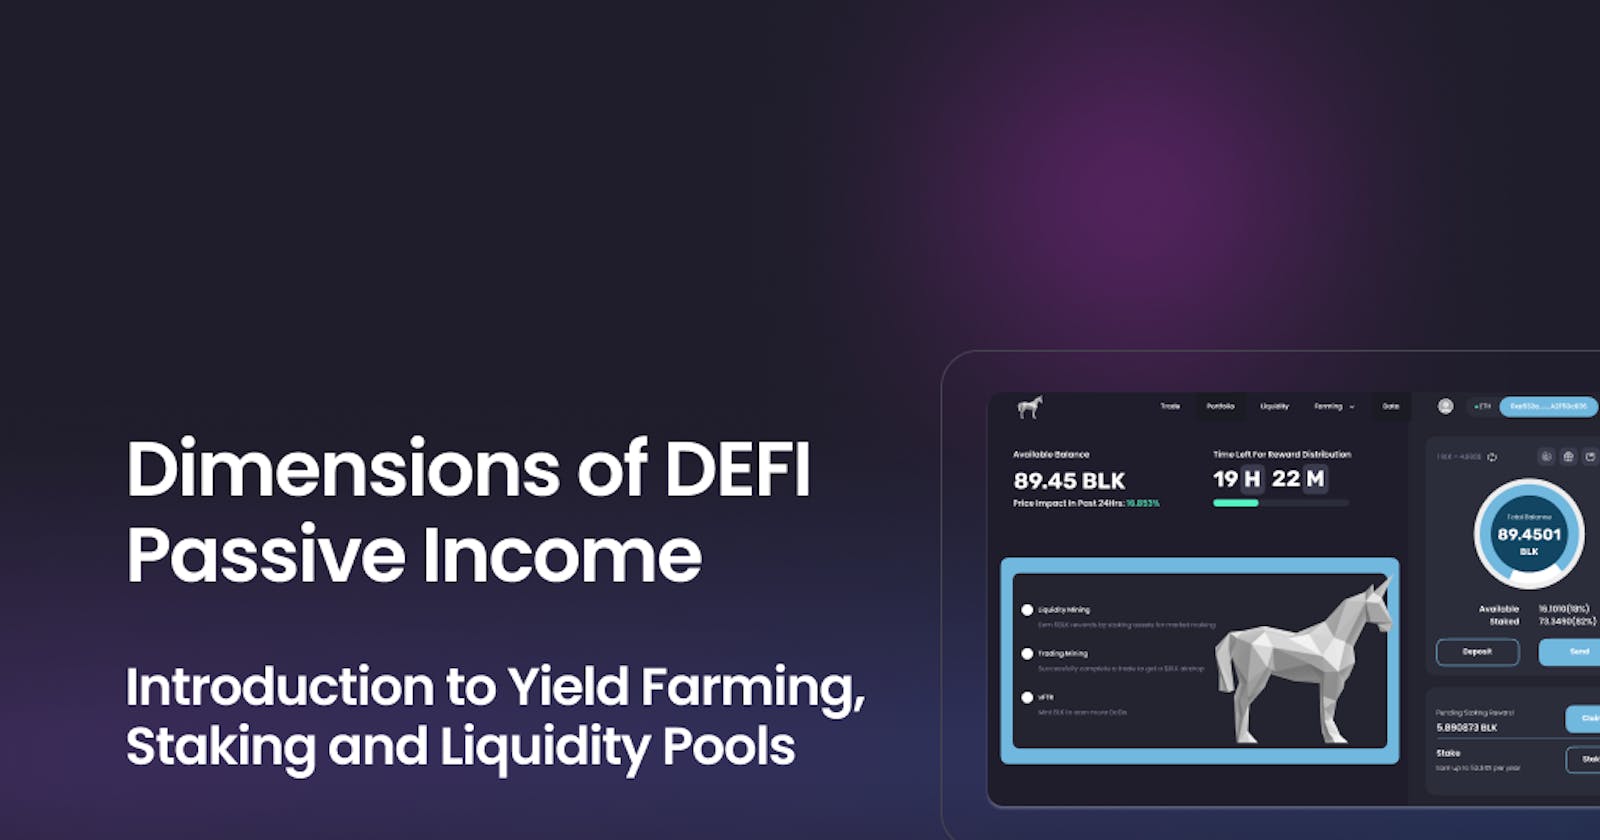 Dimensions of DEFI Passive Income: Introduction to Yield Farming, Staking and Liquidity Pools